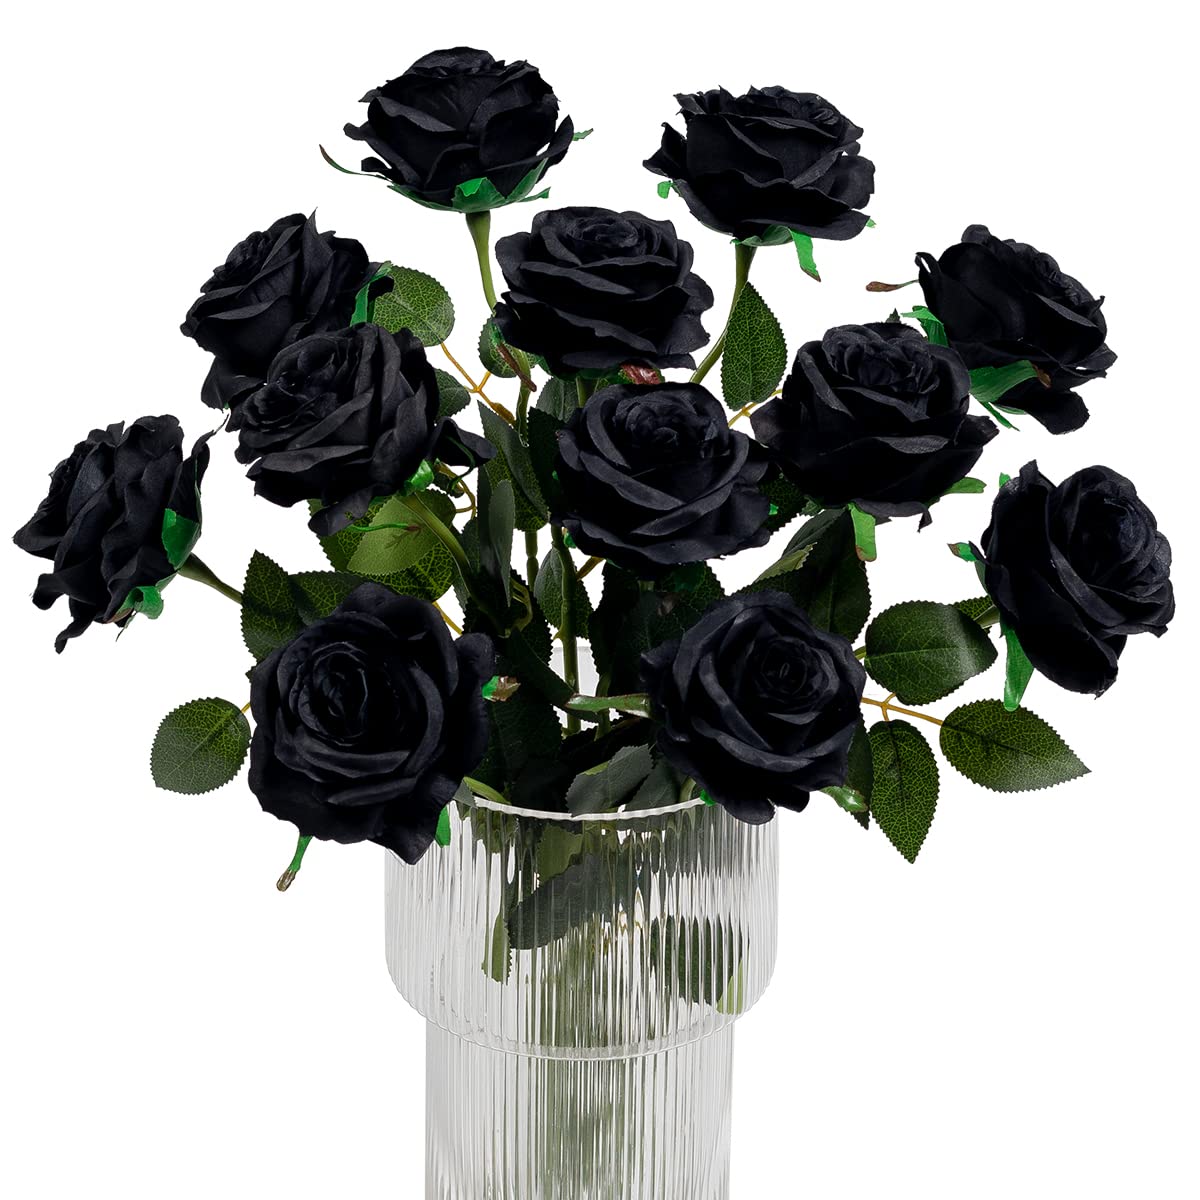 Add charm to your garden with black flowers